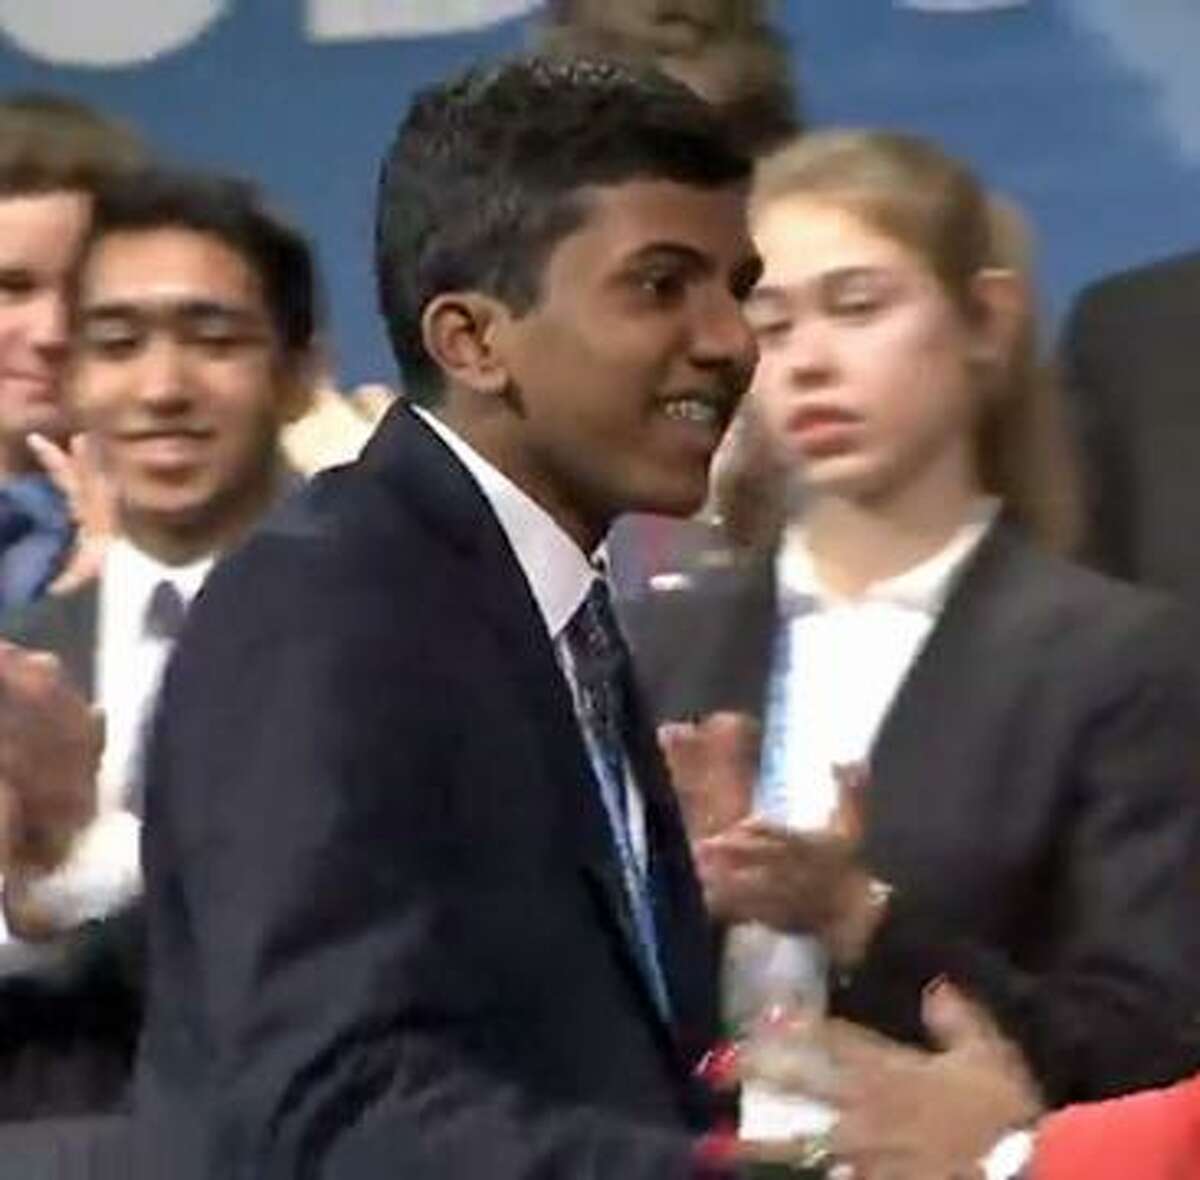 Rahul Subramaniam won first place in the microbiology category at the Intel International Science Fair in May 2017 for his inexpensive and consumer-friendly mosquito trap that would change color if any of the feeding mosquitoes were infected with the Zika virus. Subramaniam was also chosen as one of 22 Best in Category winners and was selected for a Grand Award.